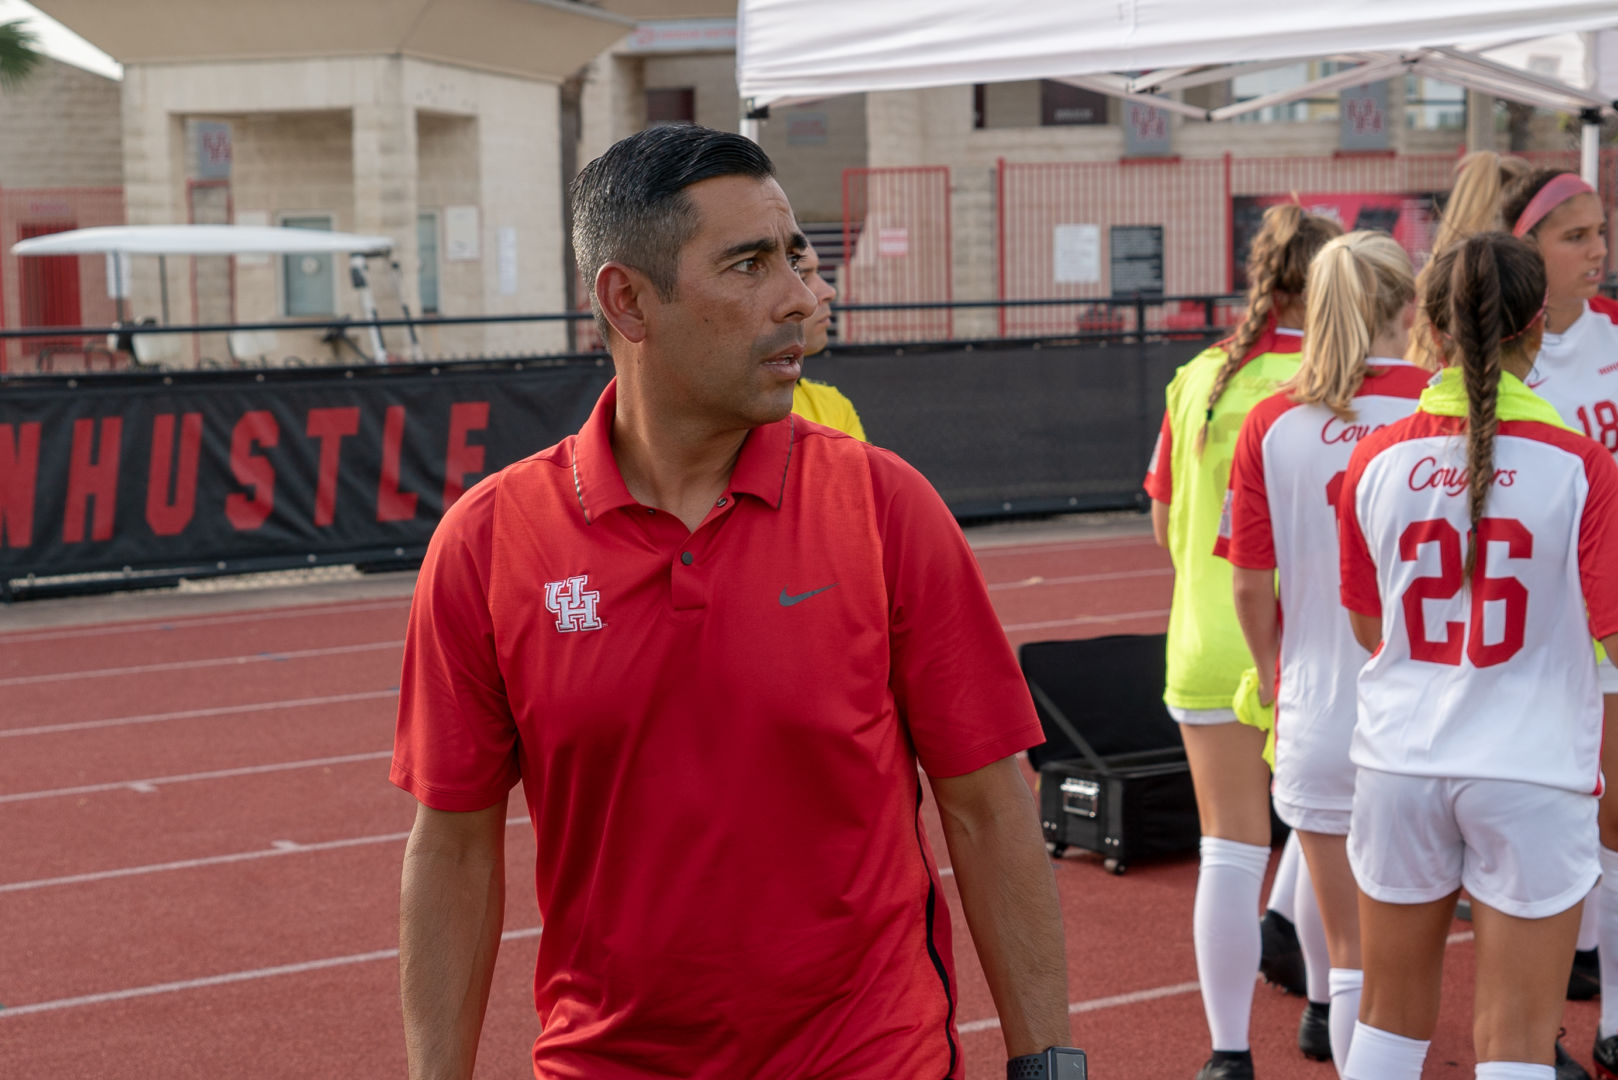 UH review. Head coach Diego Bocanegra admitted to using "physical punishment" as discipline in the program. The University is reviewing its policies after a KPRC investigation.| File photo/The Cougar